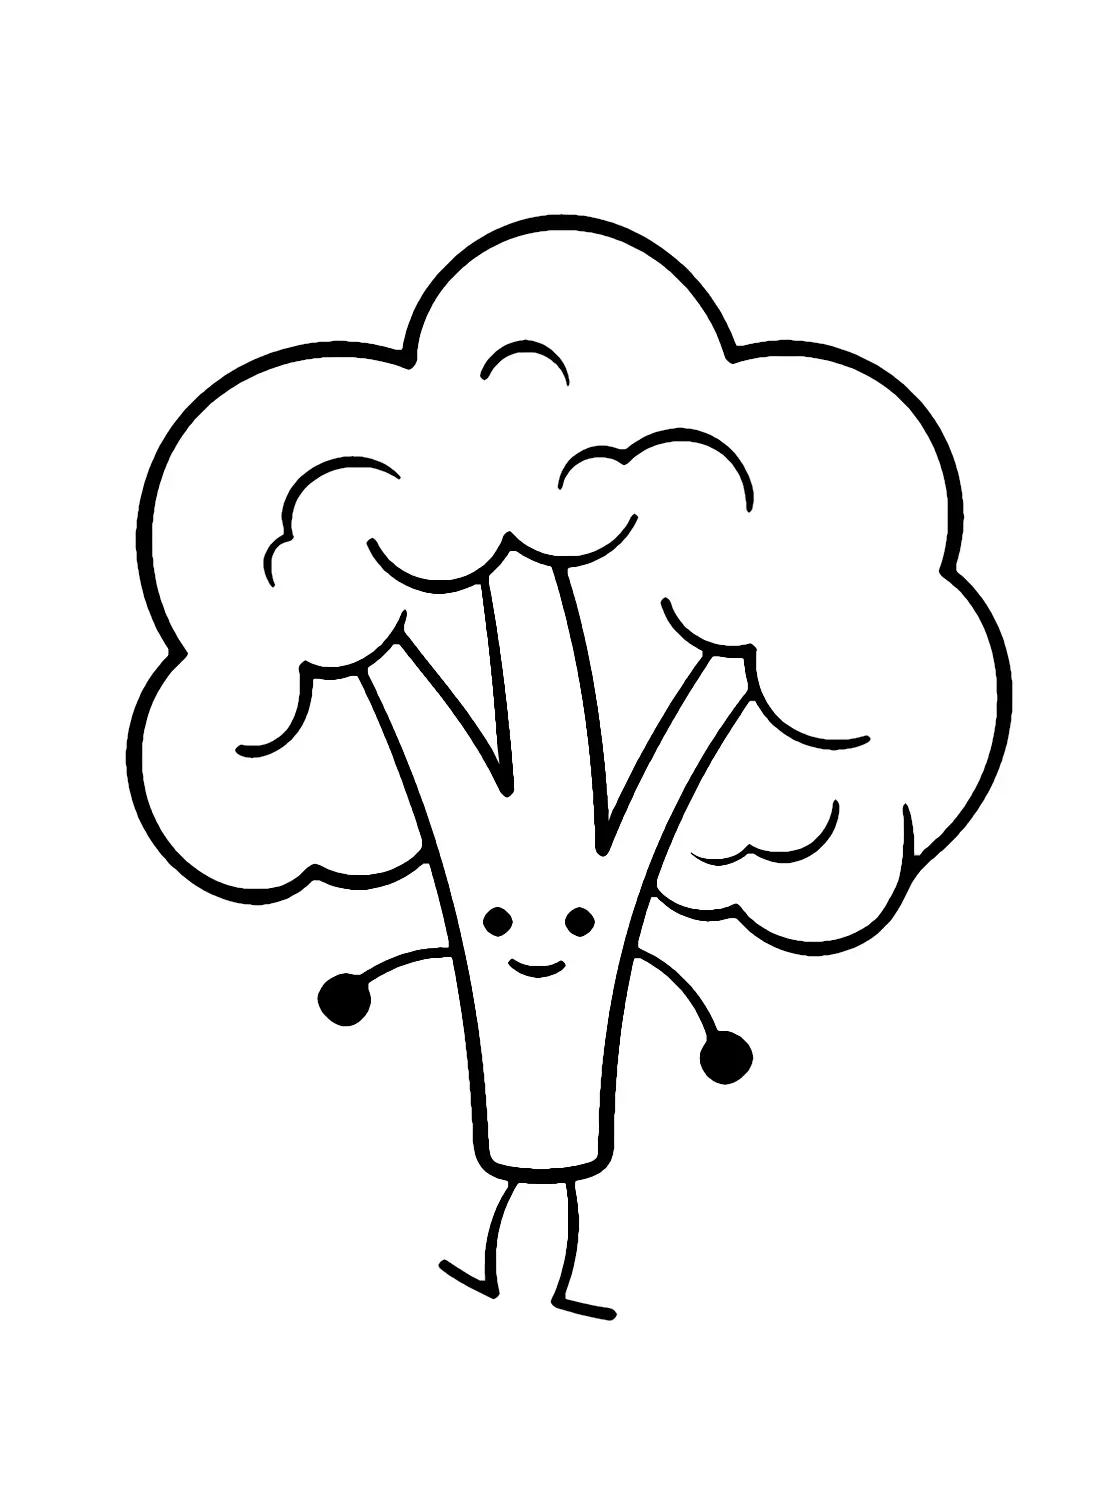 Cauliflower Coloring Pages